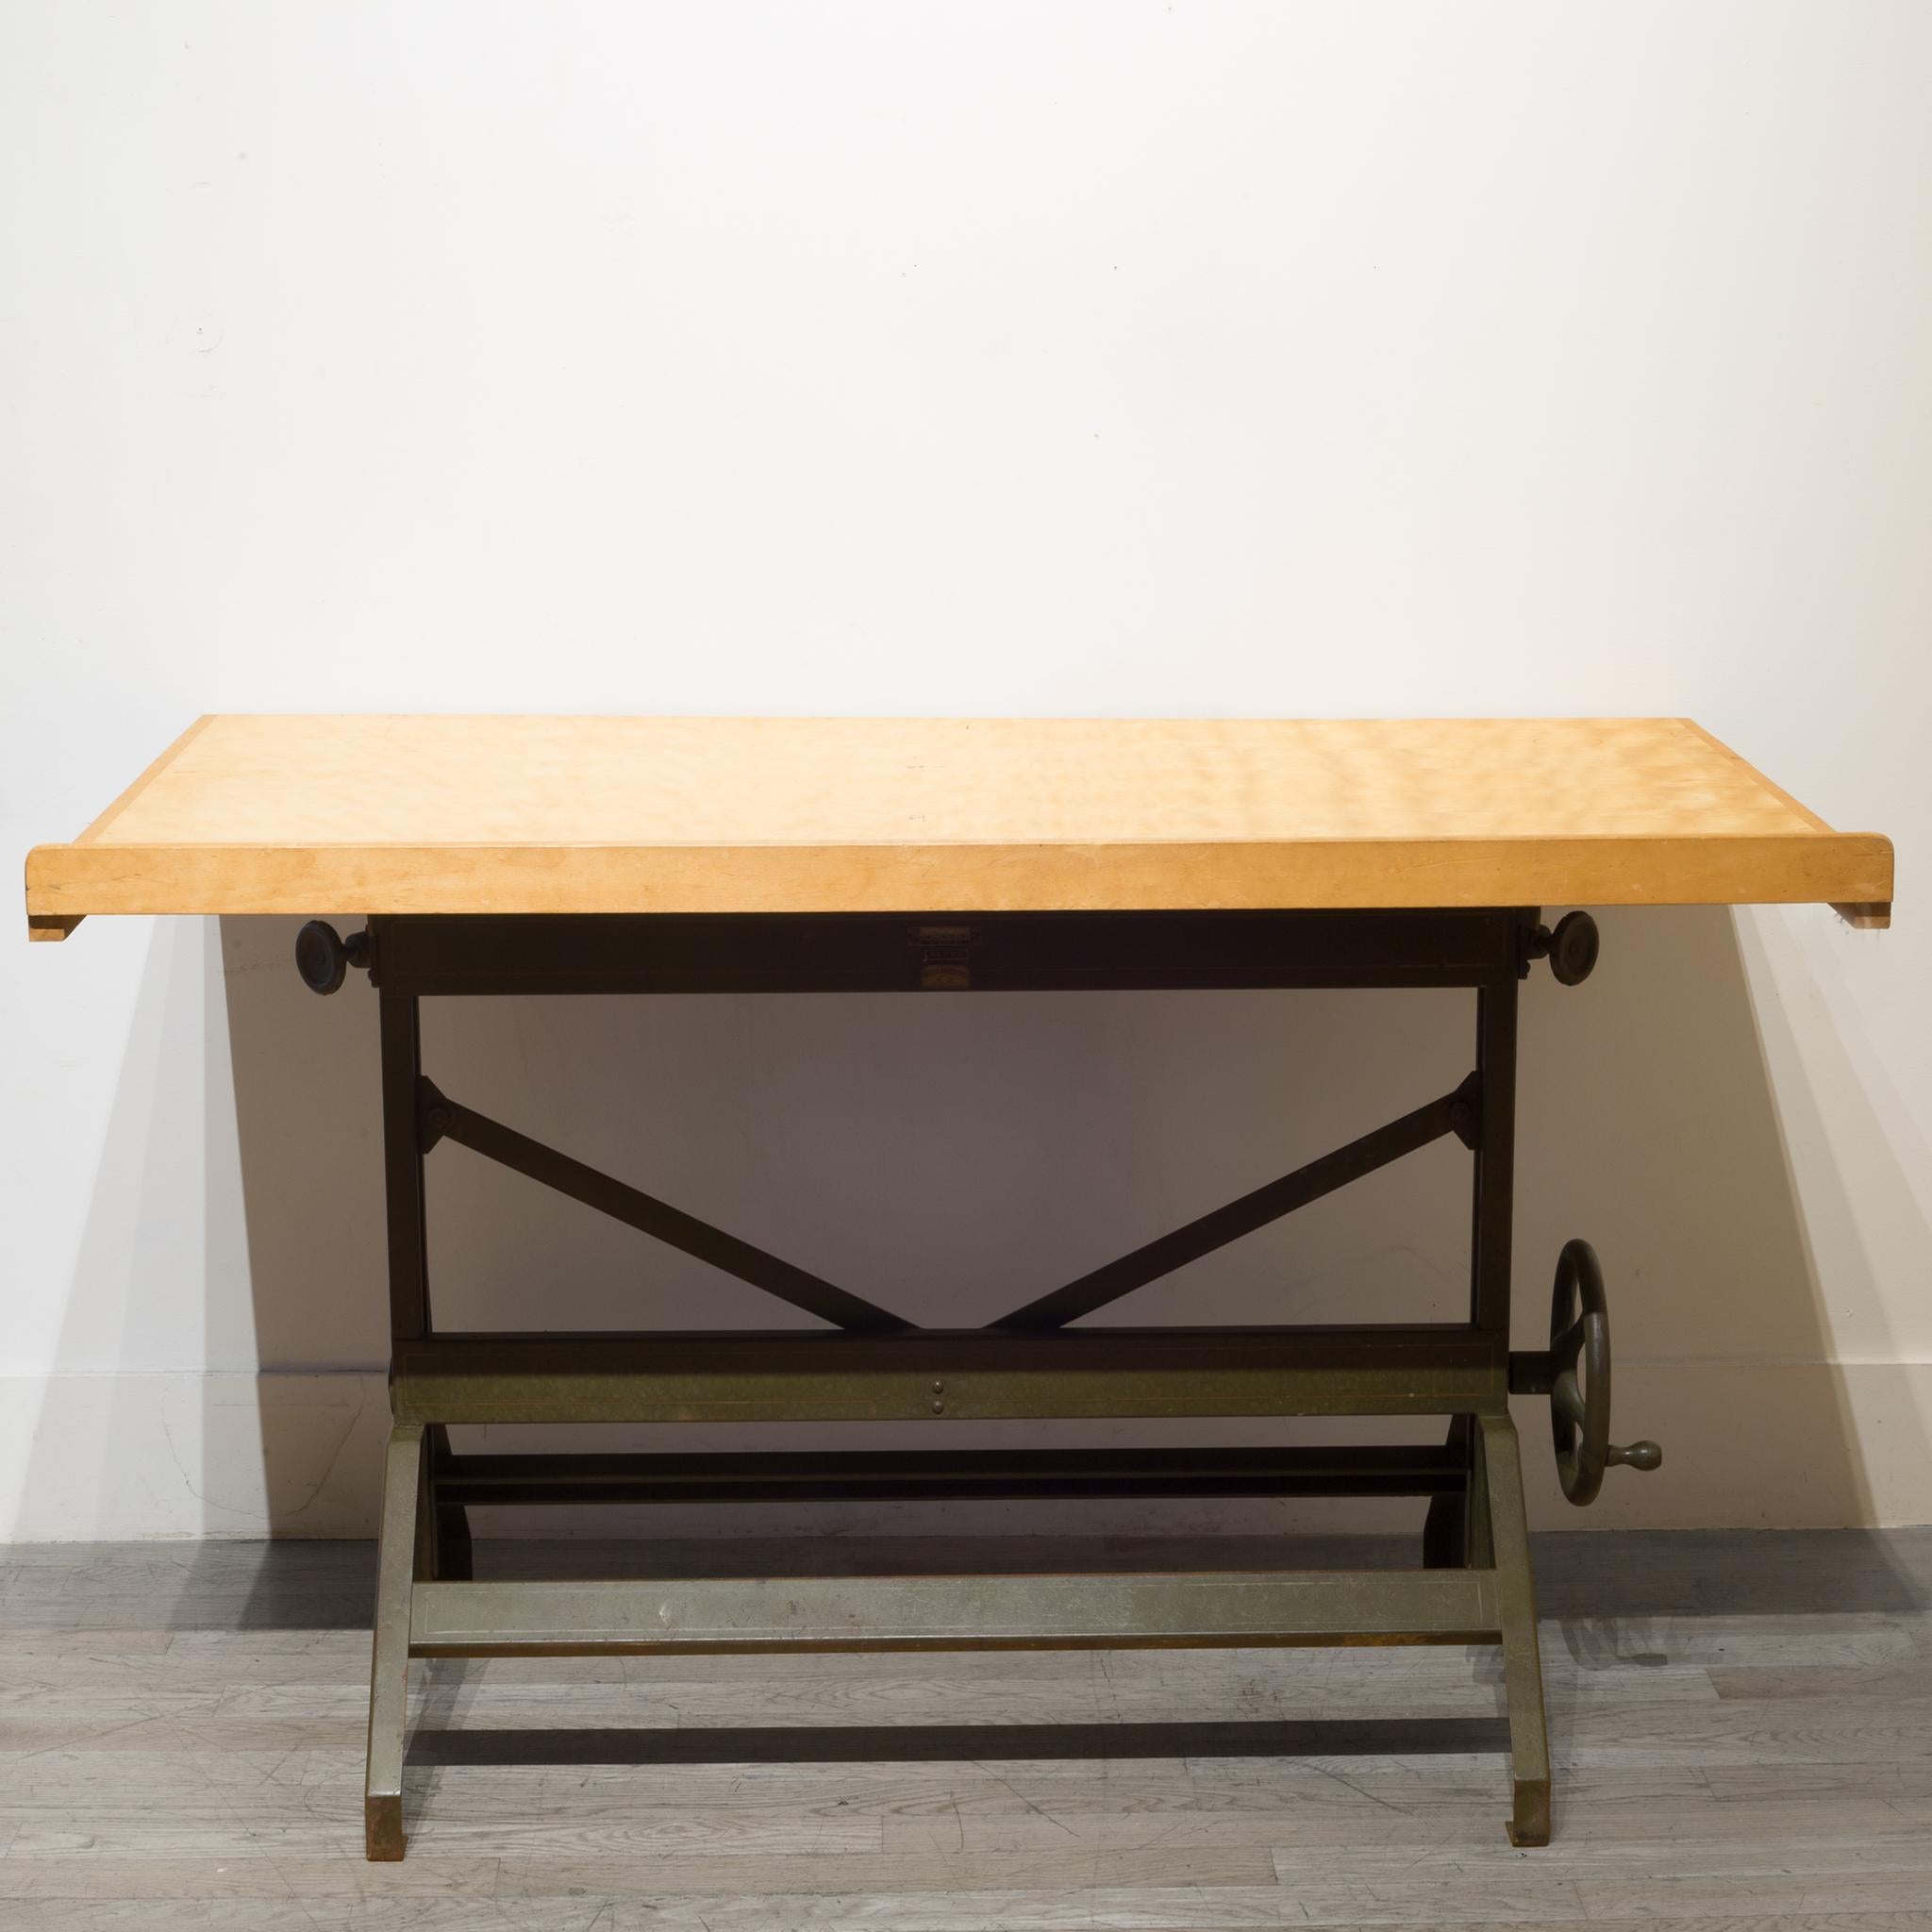 20th Century Charles Bruning Industrial Adjustable Drafting Table, circa 1940-1950